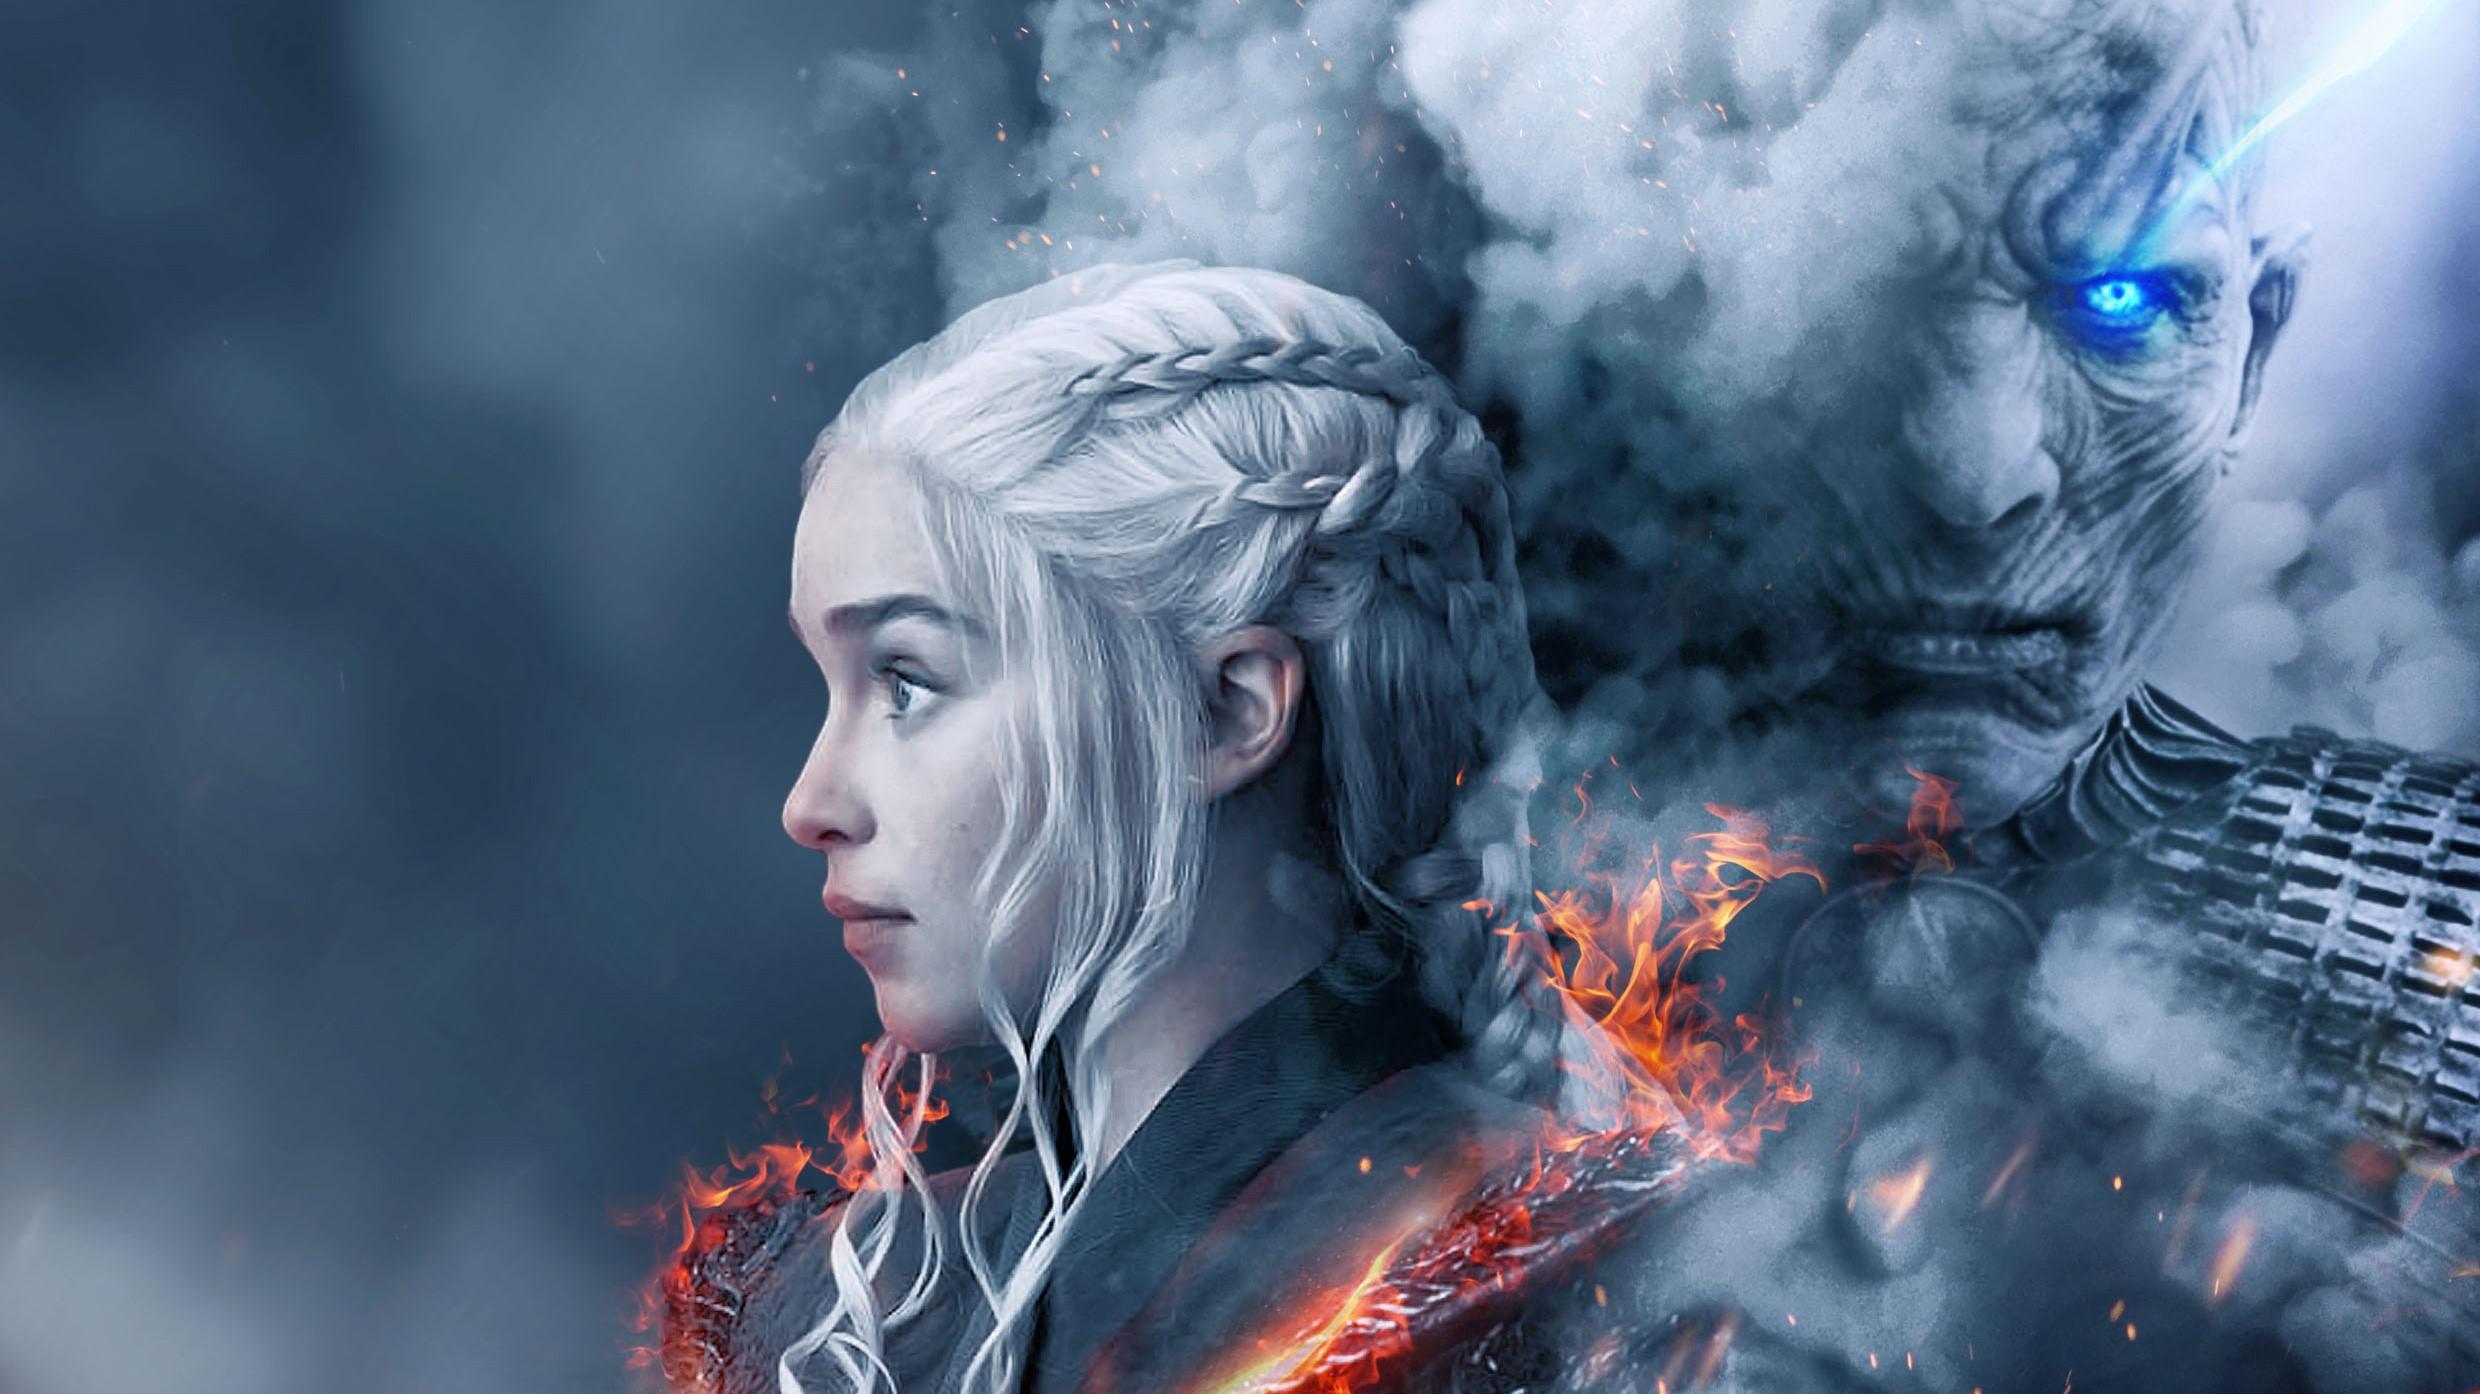 Wallpaper ID 82017 game of thrones season 8 game of thrones